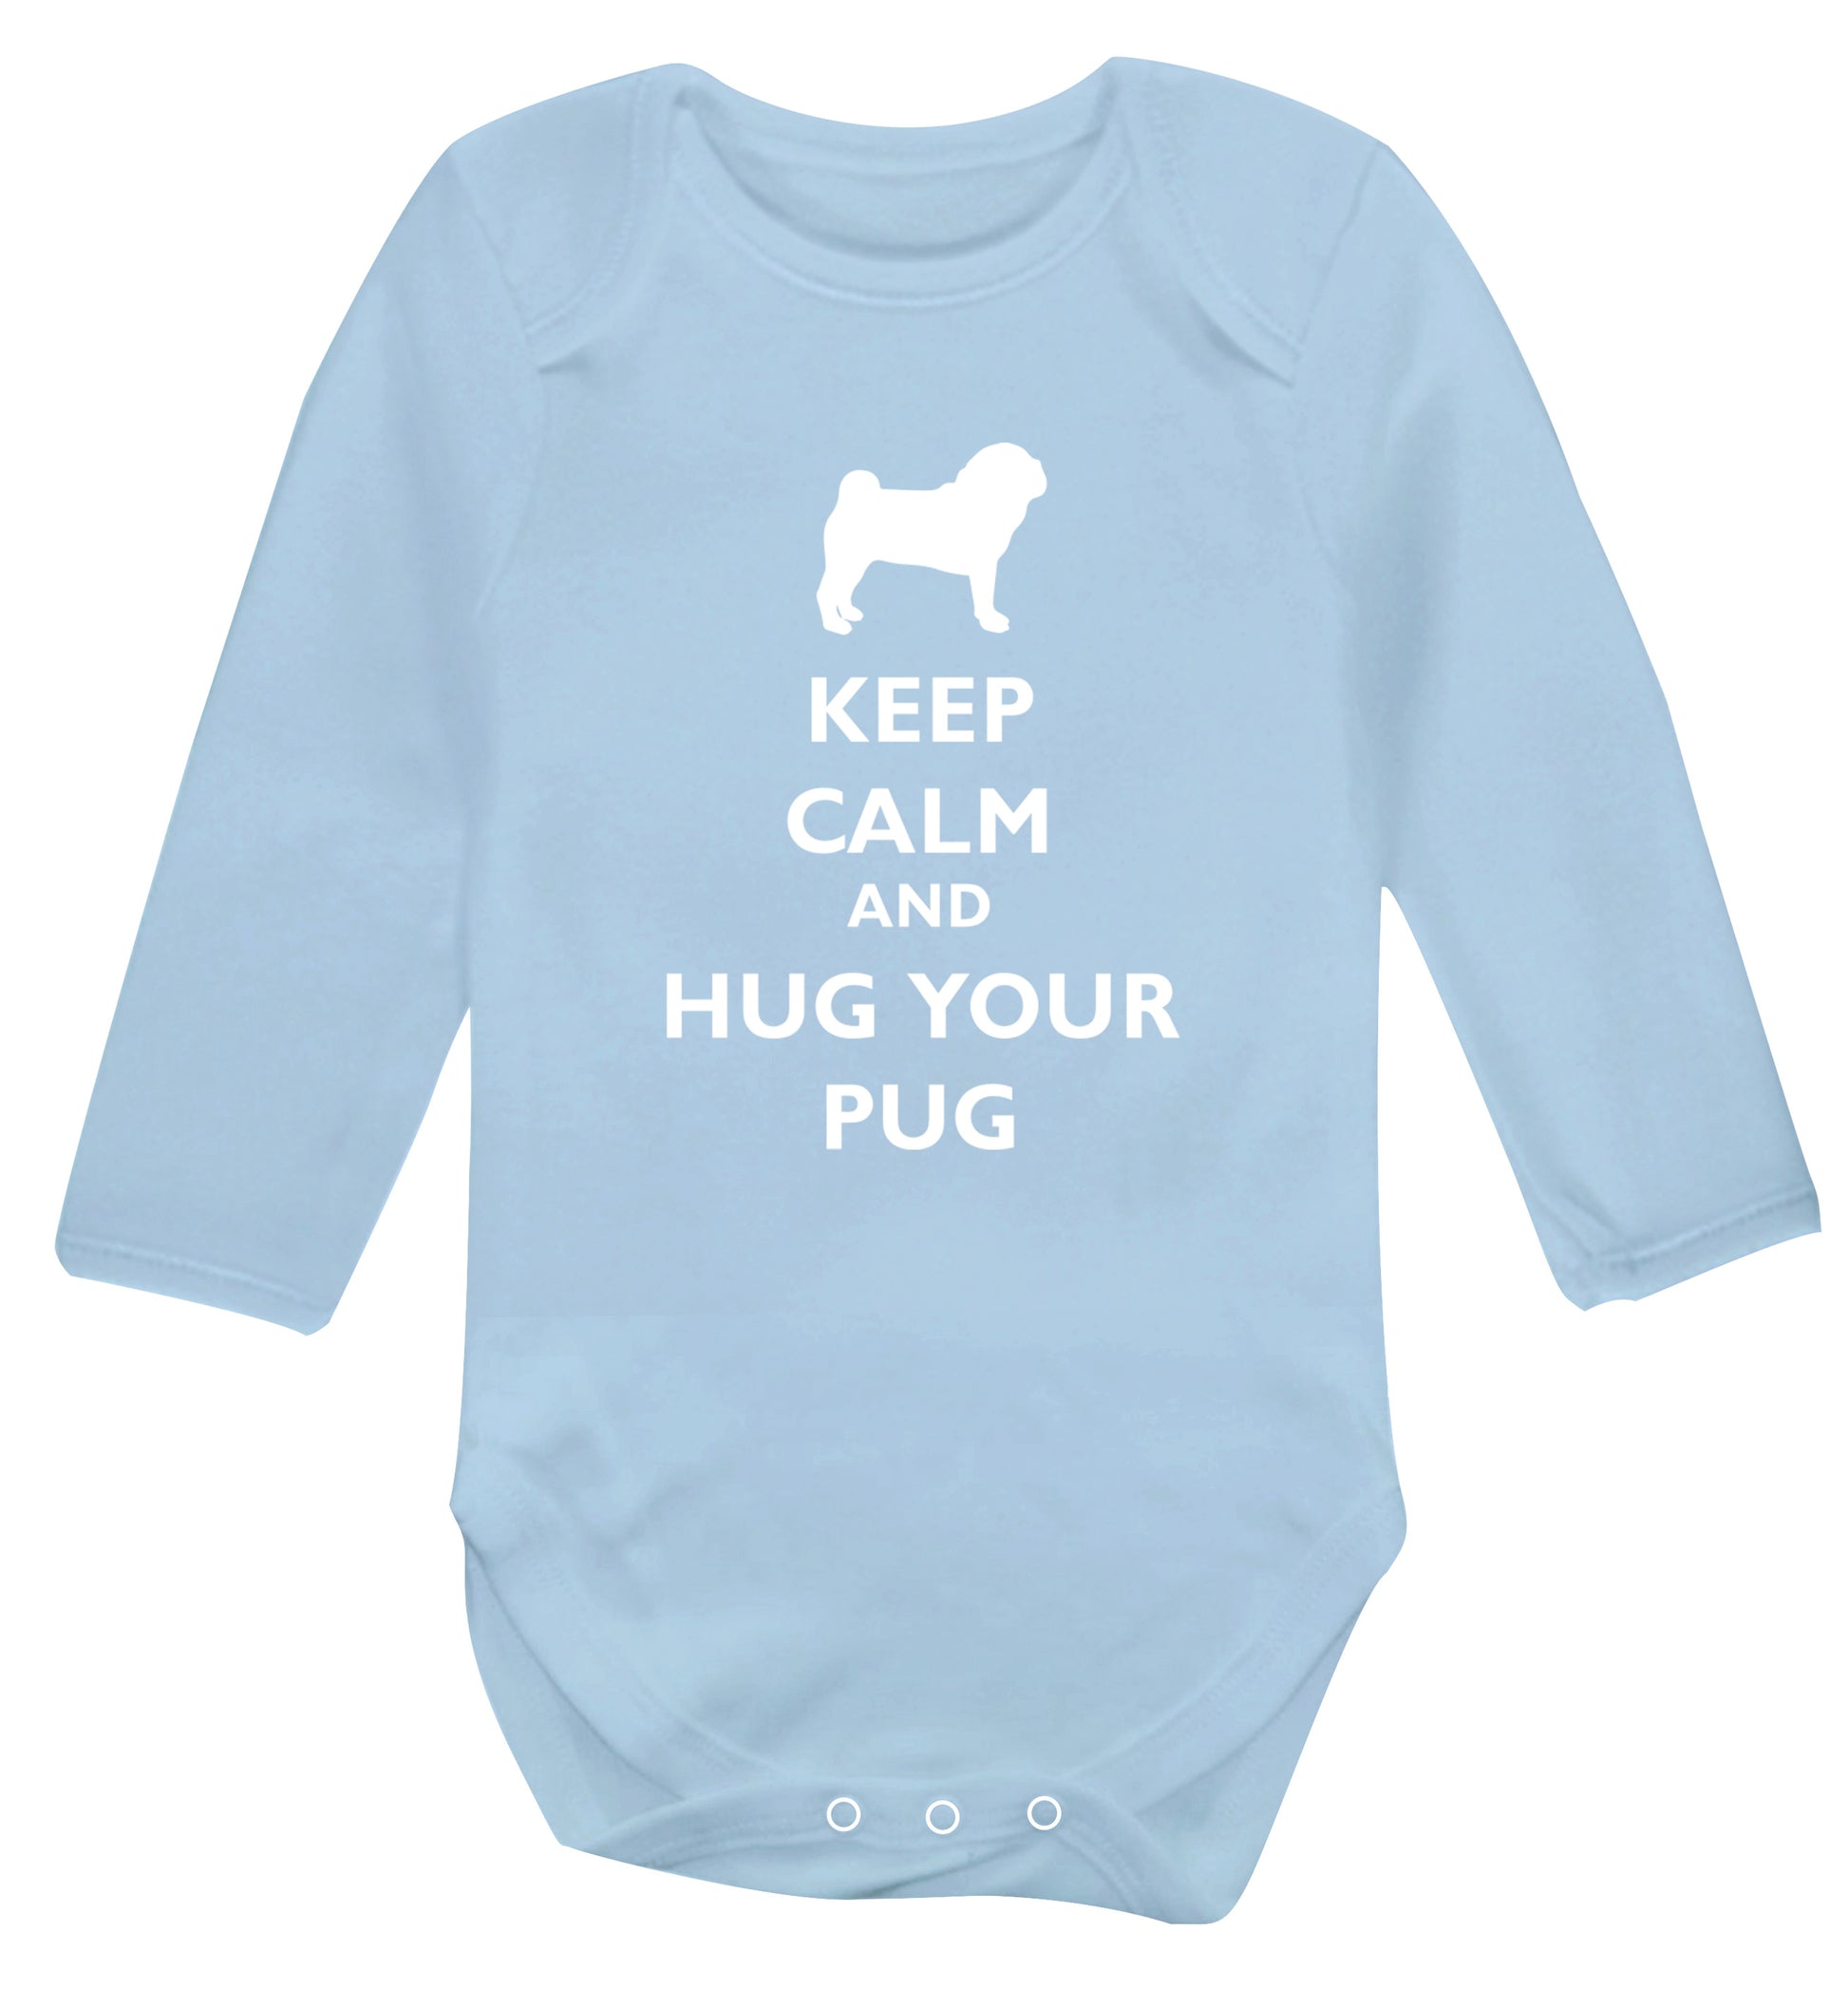 Keep calm and hug your pug Baby Vest long sleeved pale blue 6-12 months